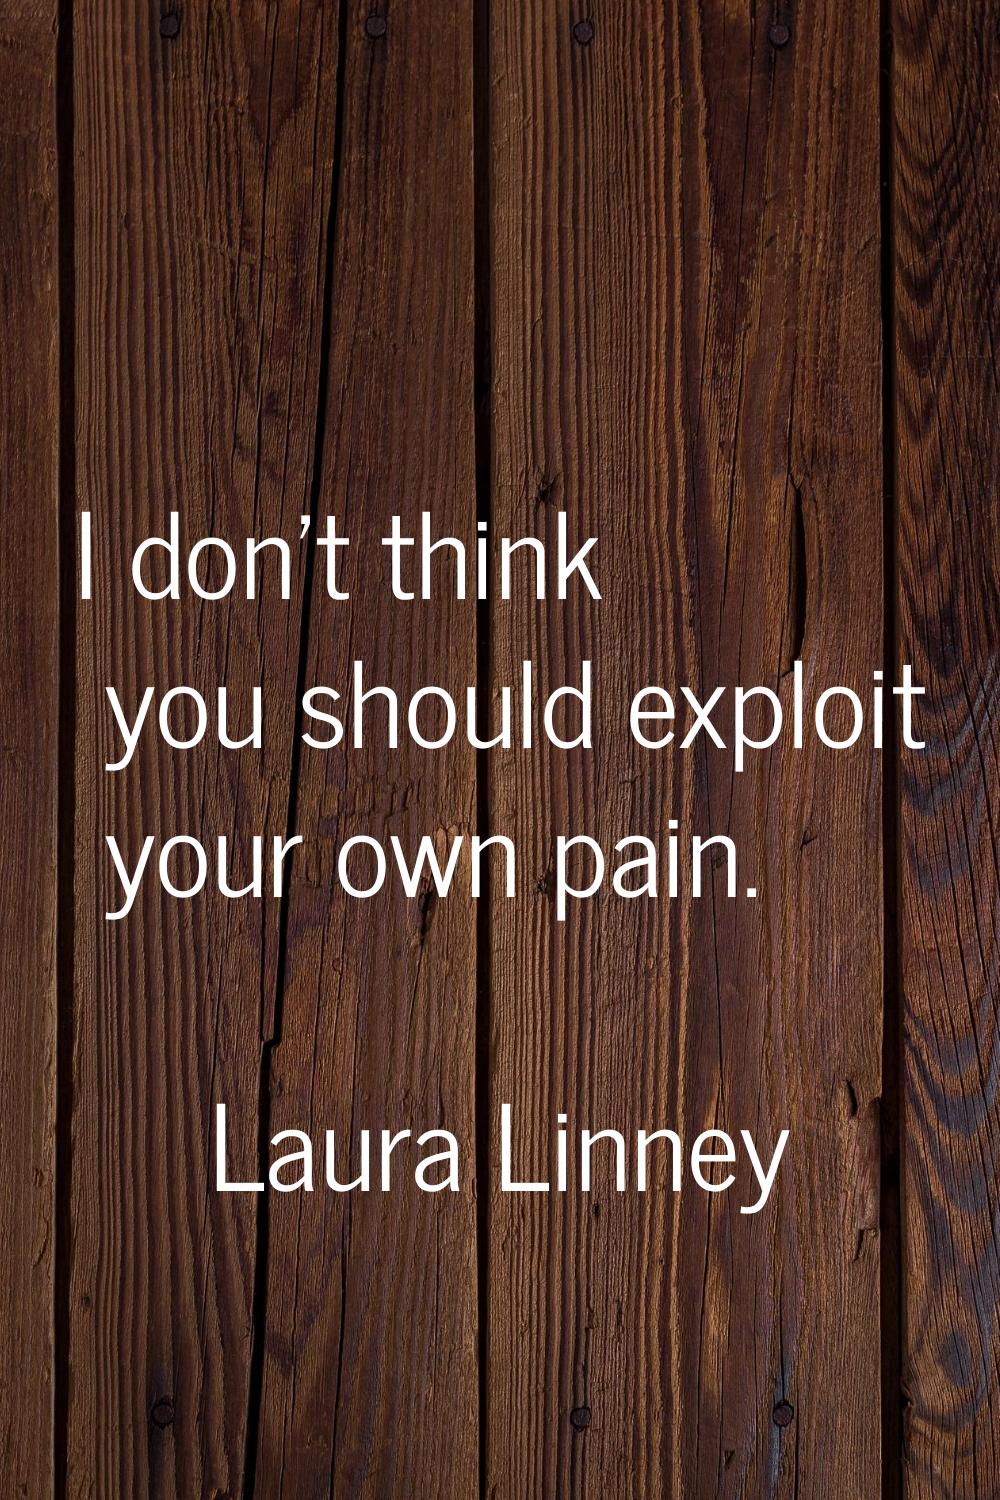 I don't think you should exploit your own pain.